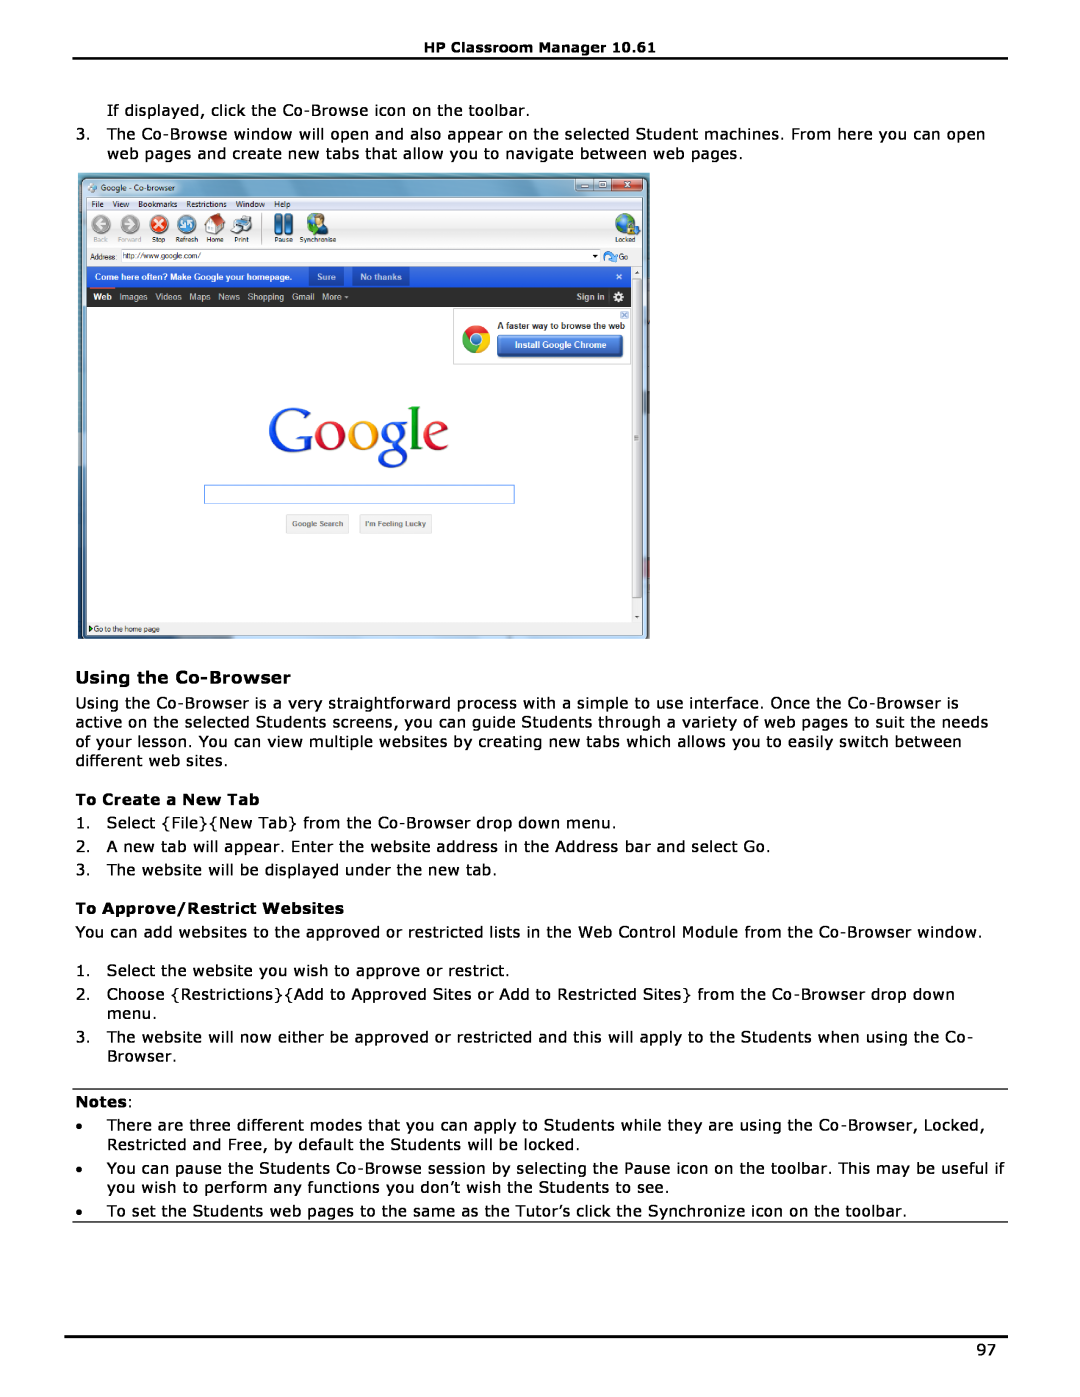 HP Classroom Manager manual Using the Co-Browser, To Create a New Tab, To Approve/Restrict Websites 